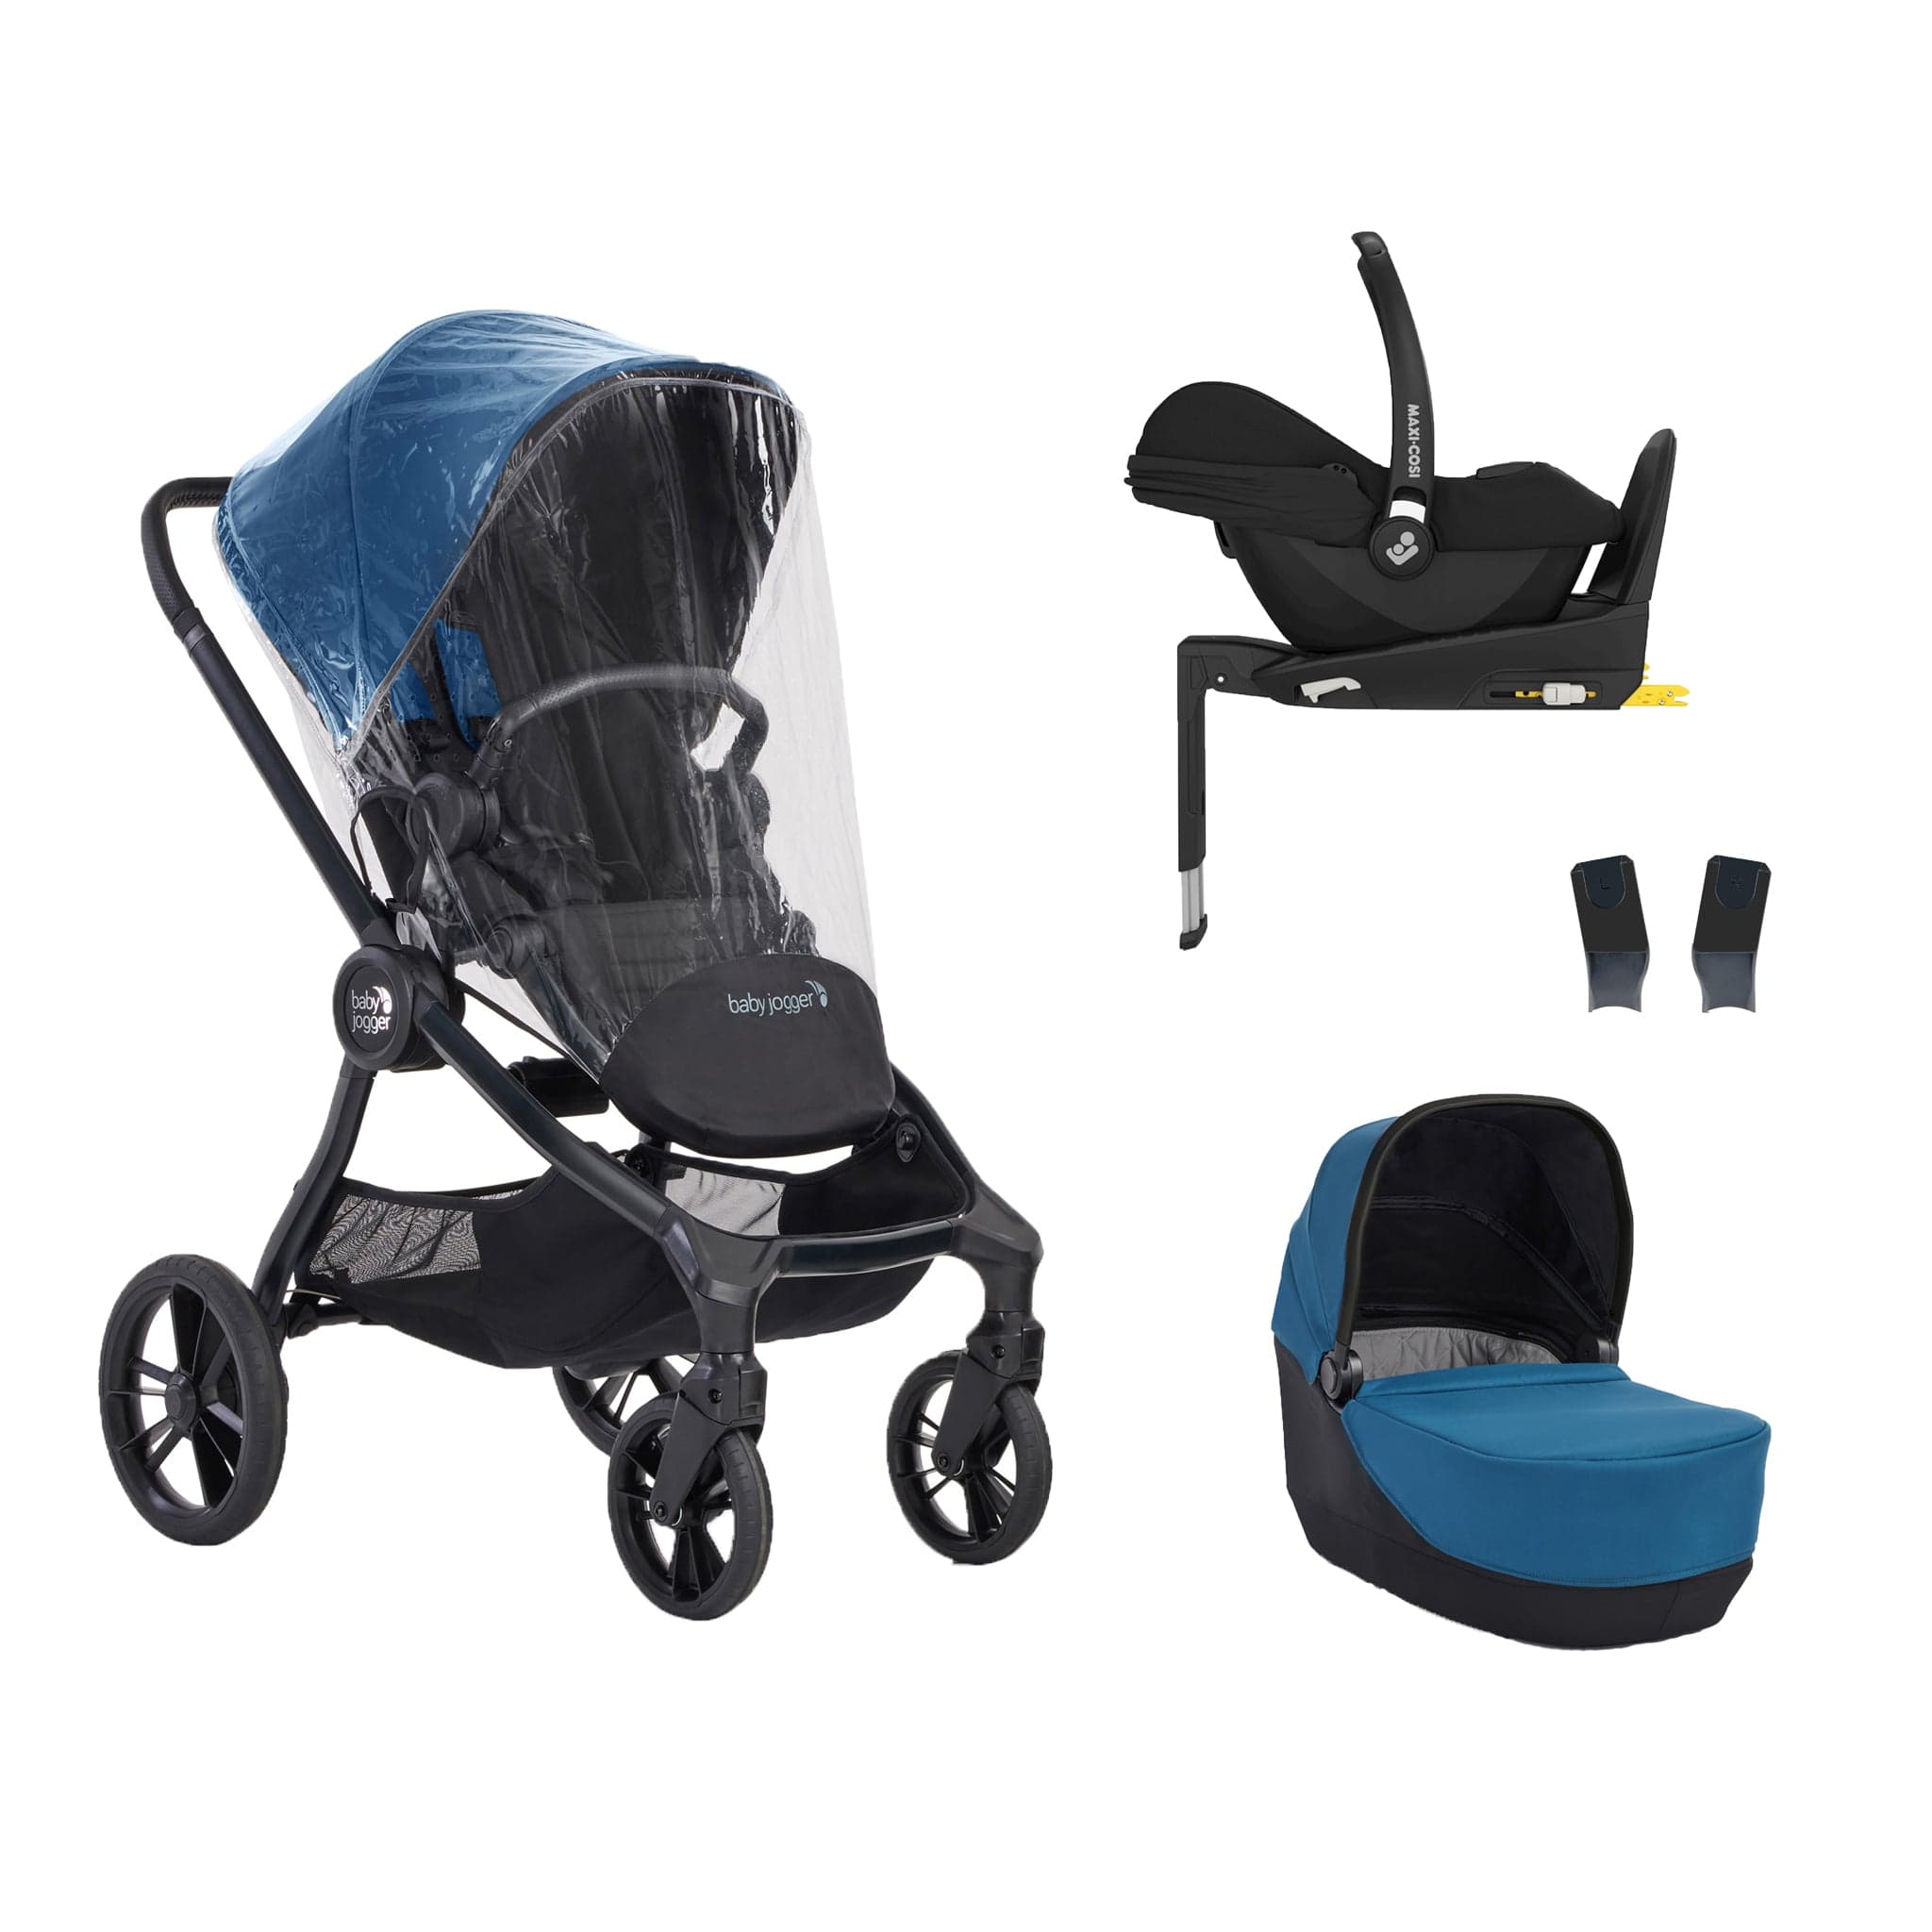 Baby Jogger baby pushchairs Baby Jogger City Sights Cabriofix i-Size Bundle - Deep Teal CIT-TEL-11827-CAB